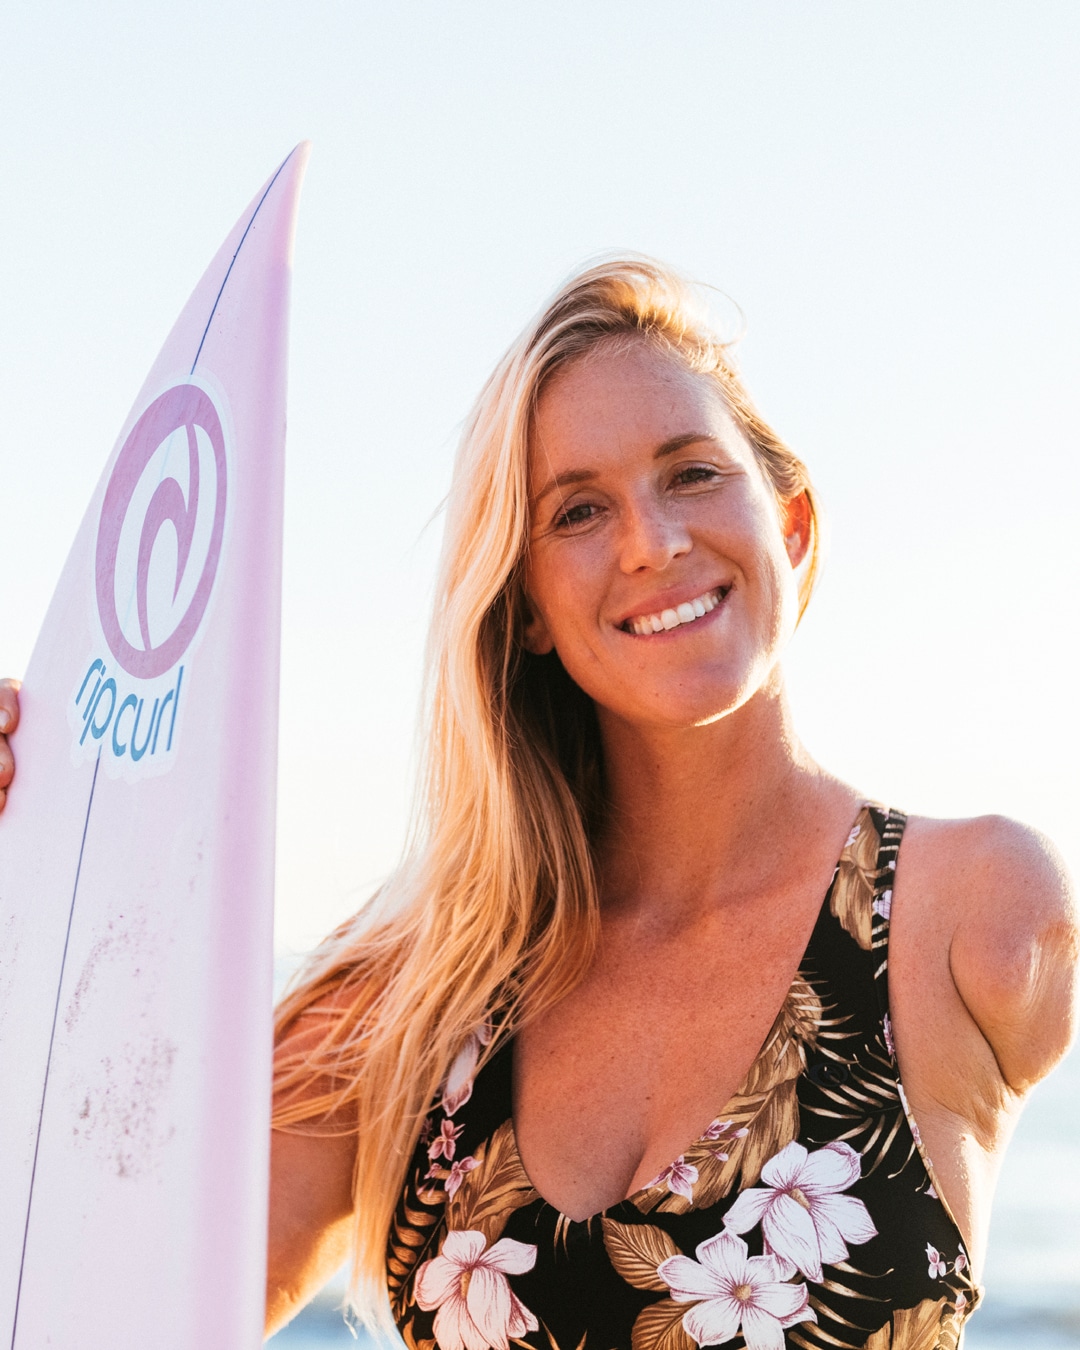 https://surfgirlmag.com/wp-content/uploads/2022/01/Bethany-Hamilton-Signs-Another-5-Years-With-Rip-Curl_RunSwimSurf.jpg